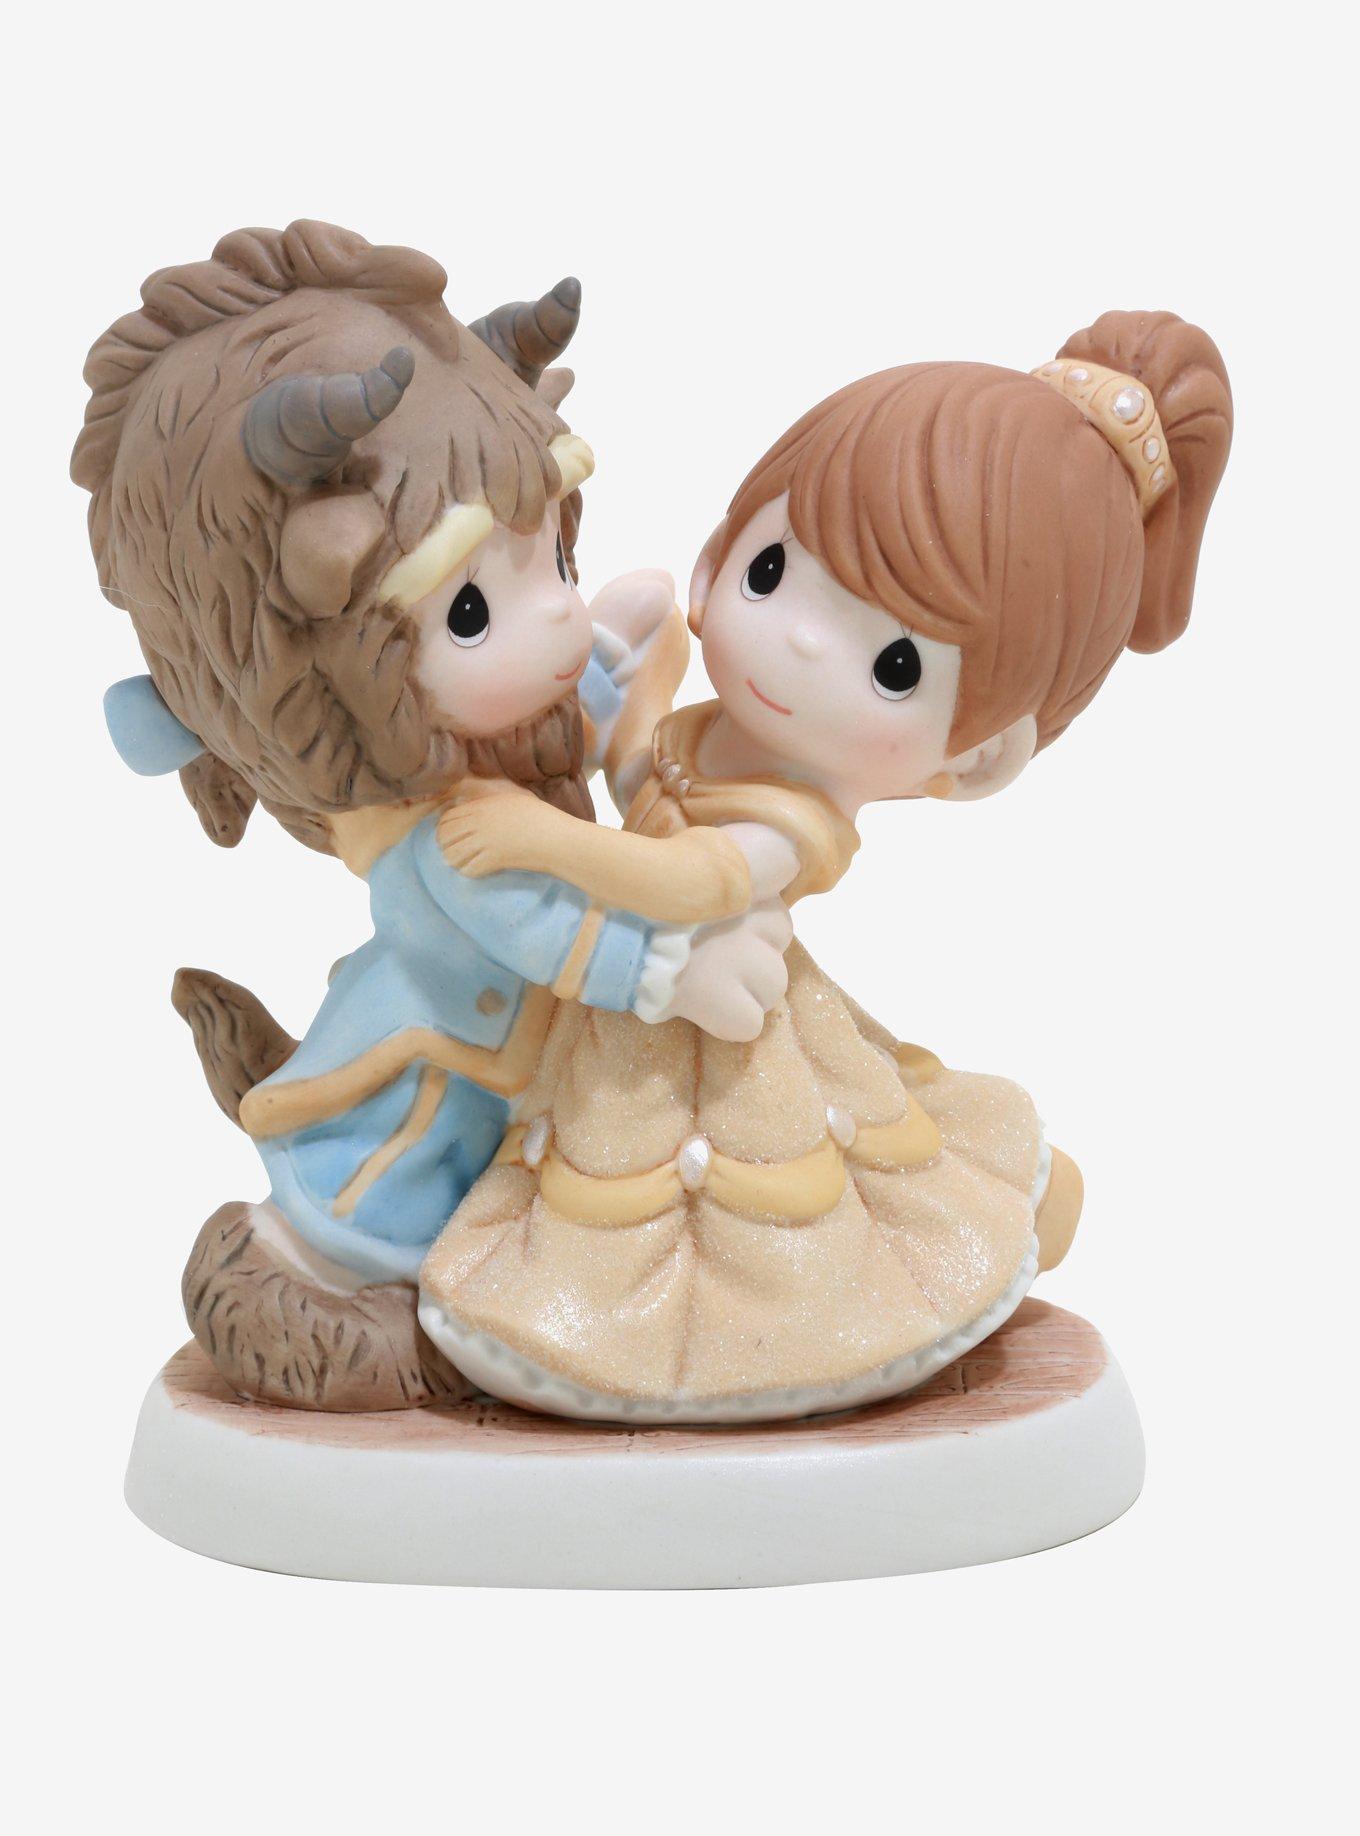 Precious Moments Disney Beauty And The Beast You Are My Fairy Tale Come True Figurine, , hi-res